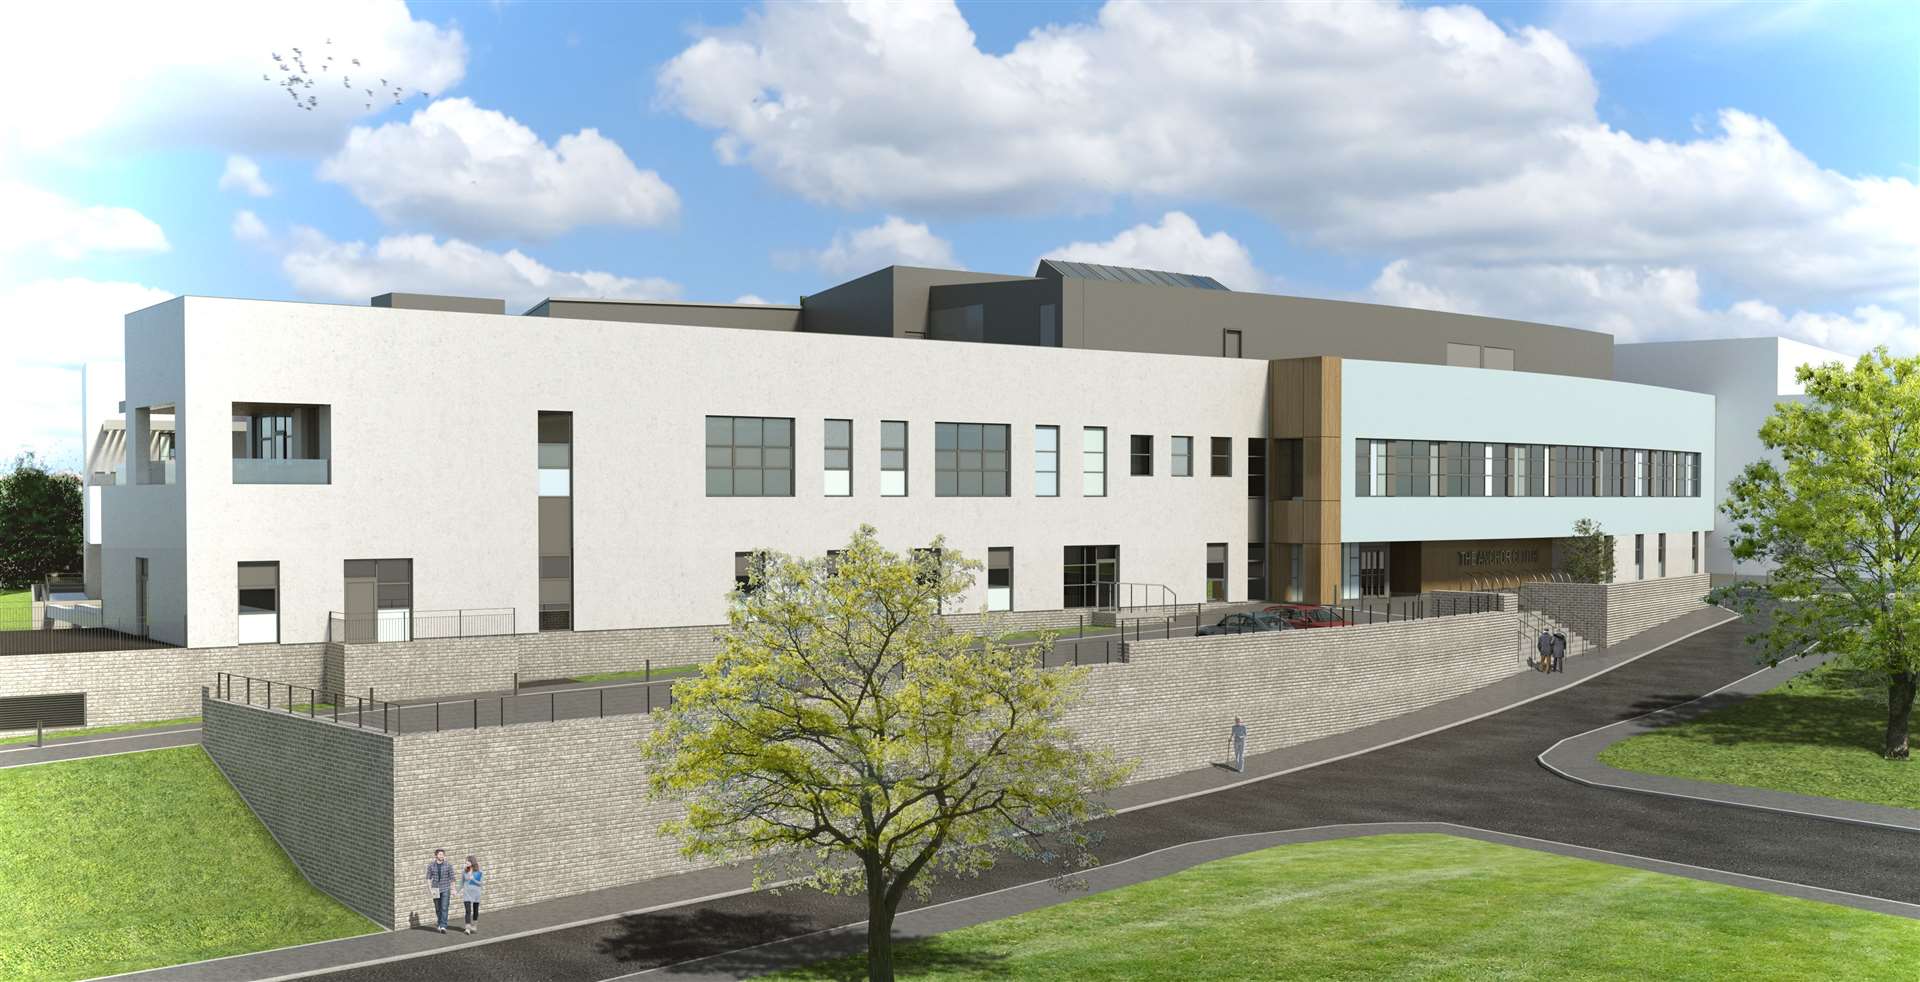 The next step in the provision of a new maternity hospital for the north-east, the Baird Family Centre has taken a step forward